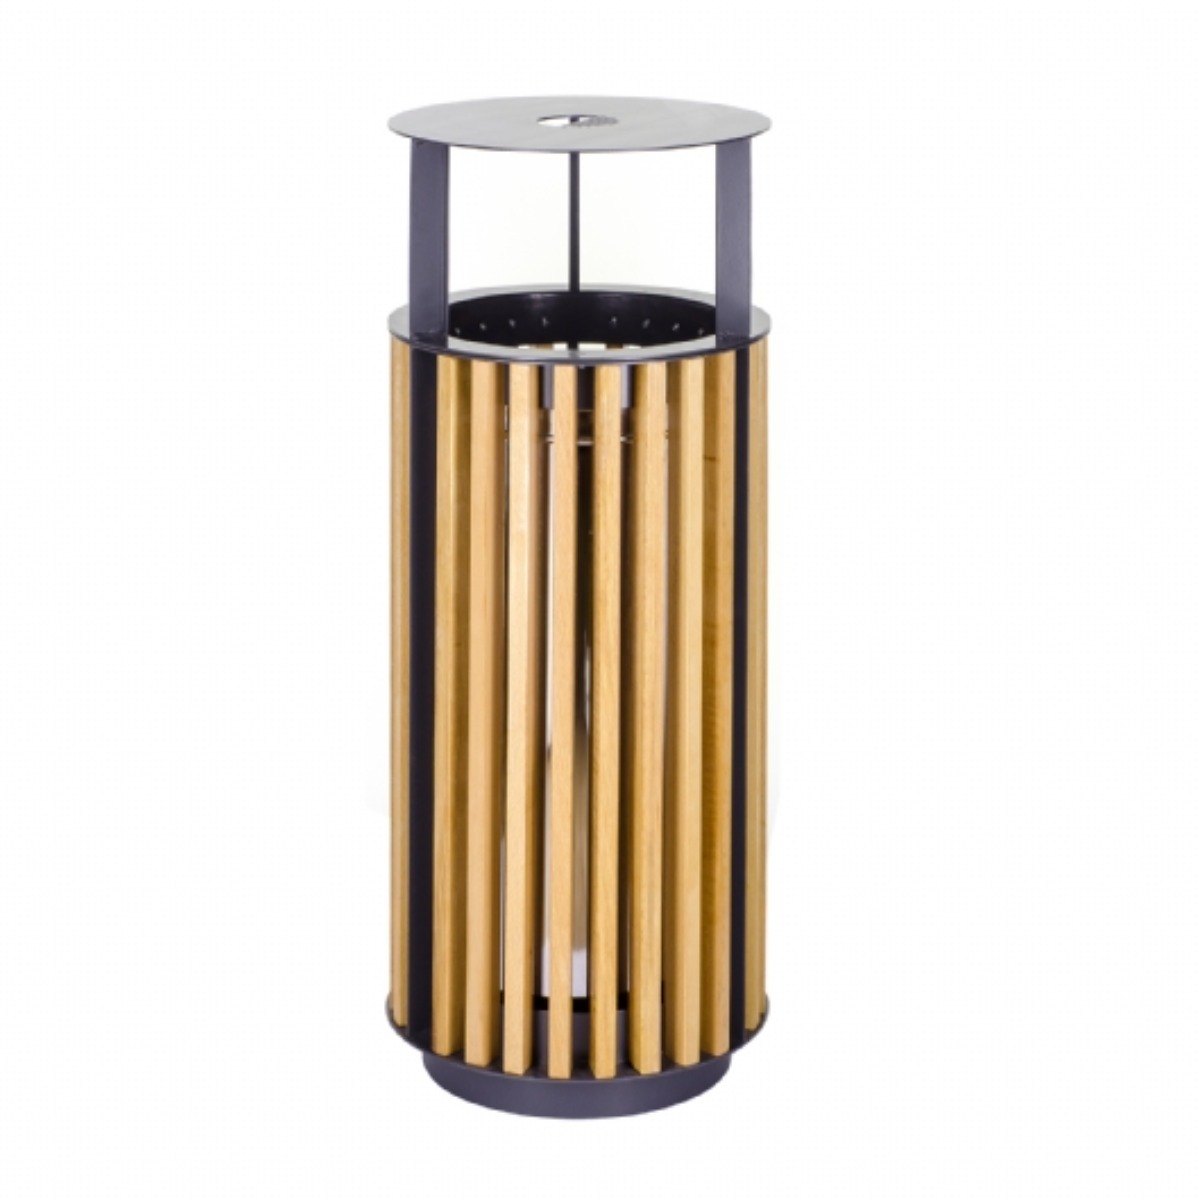 AB-509 Wood Open Space Trash Can product logo